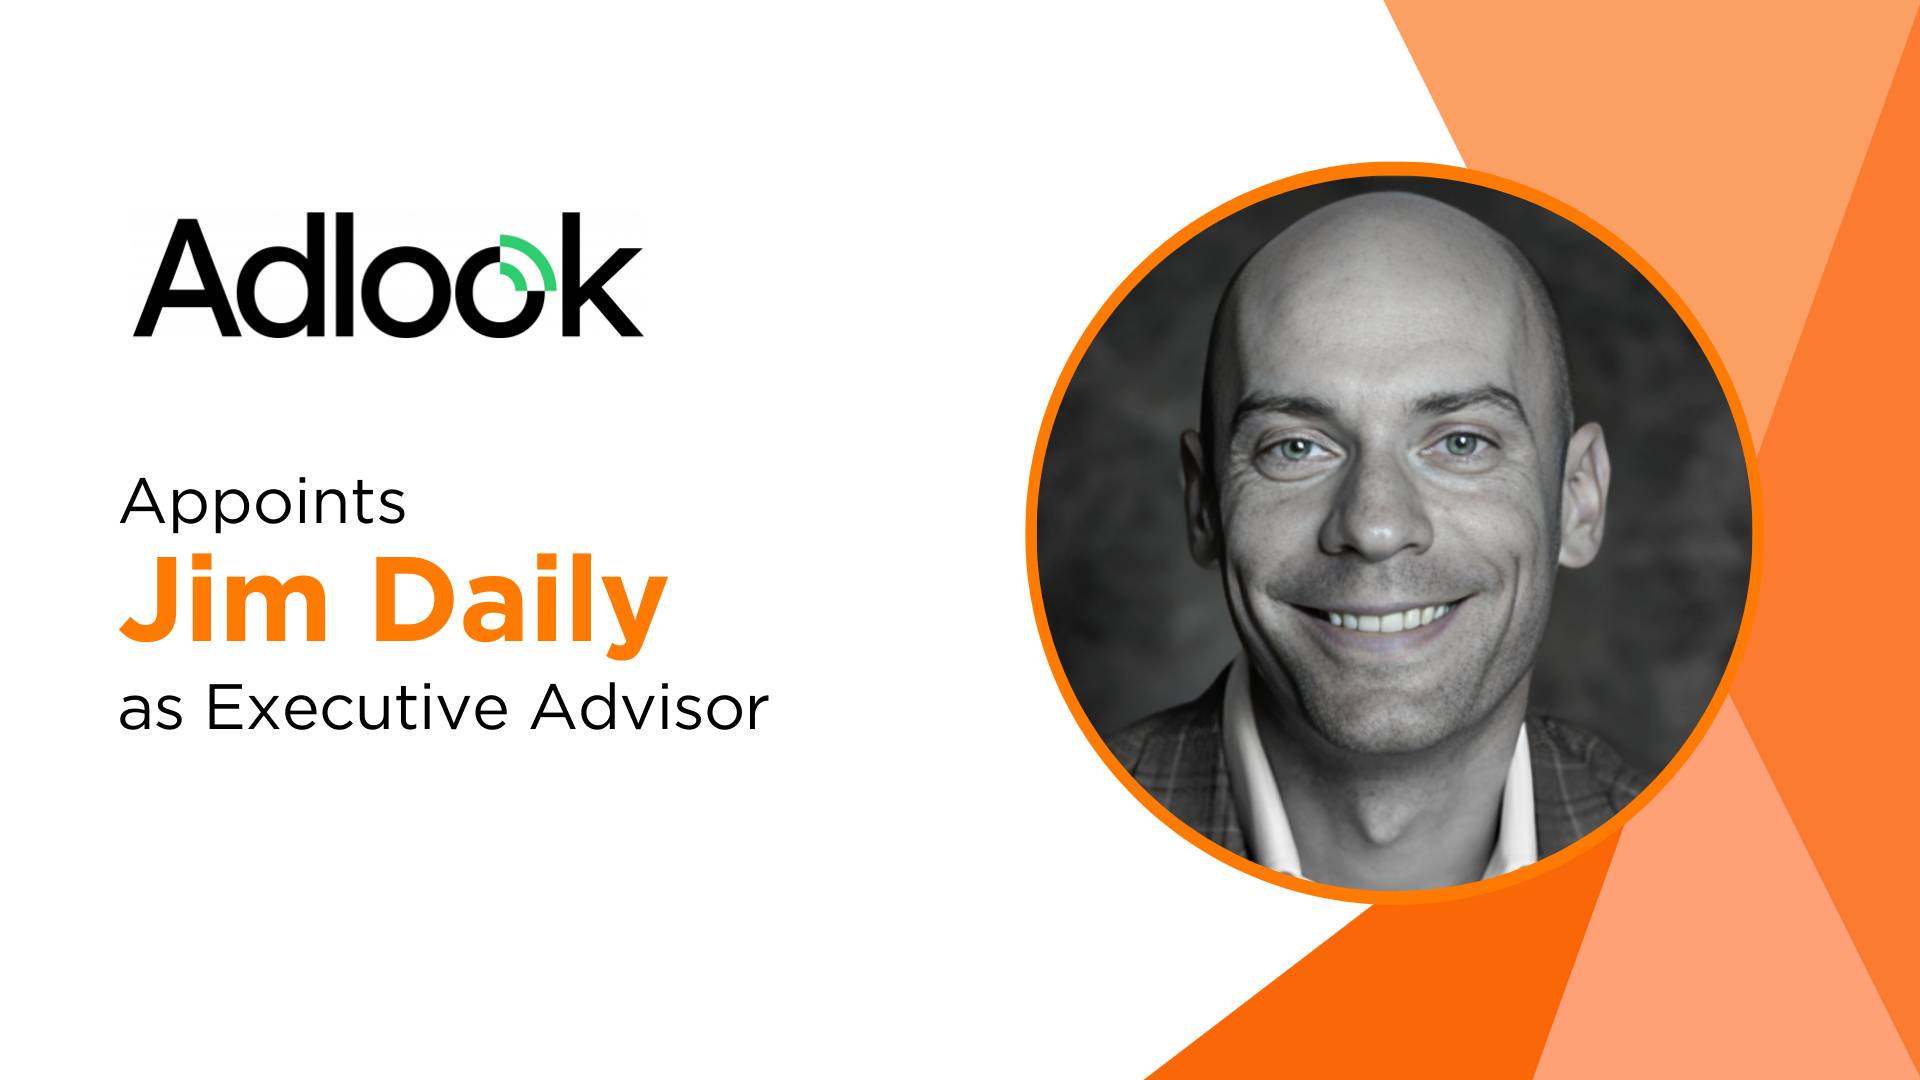 Adlook Appoints Jim Daily as Executive Advisor to Drive GTM Strategy